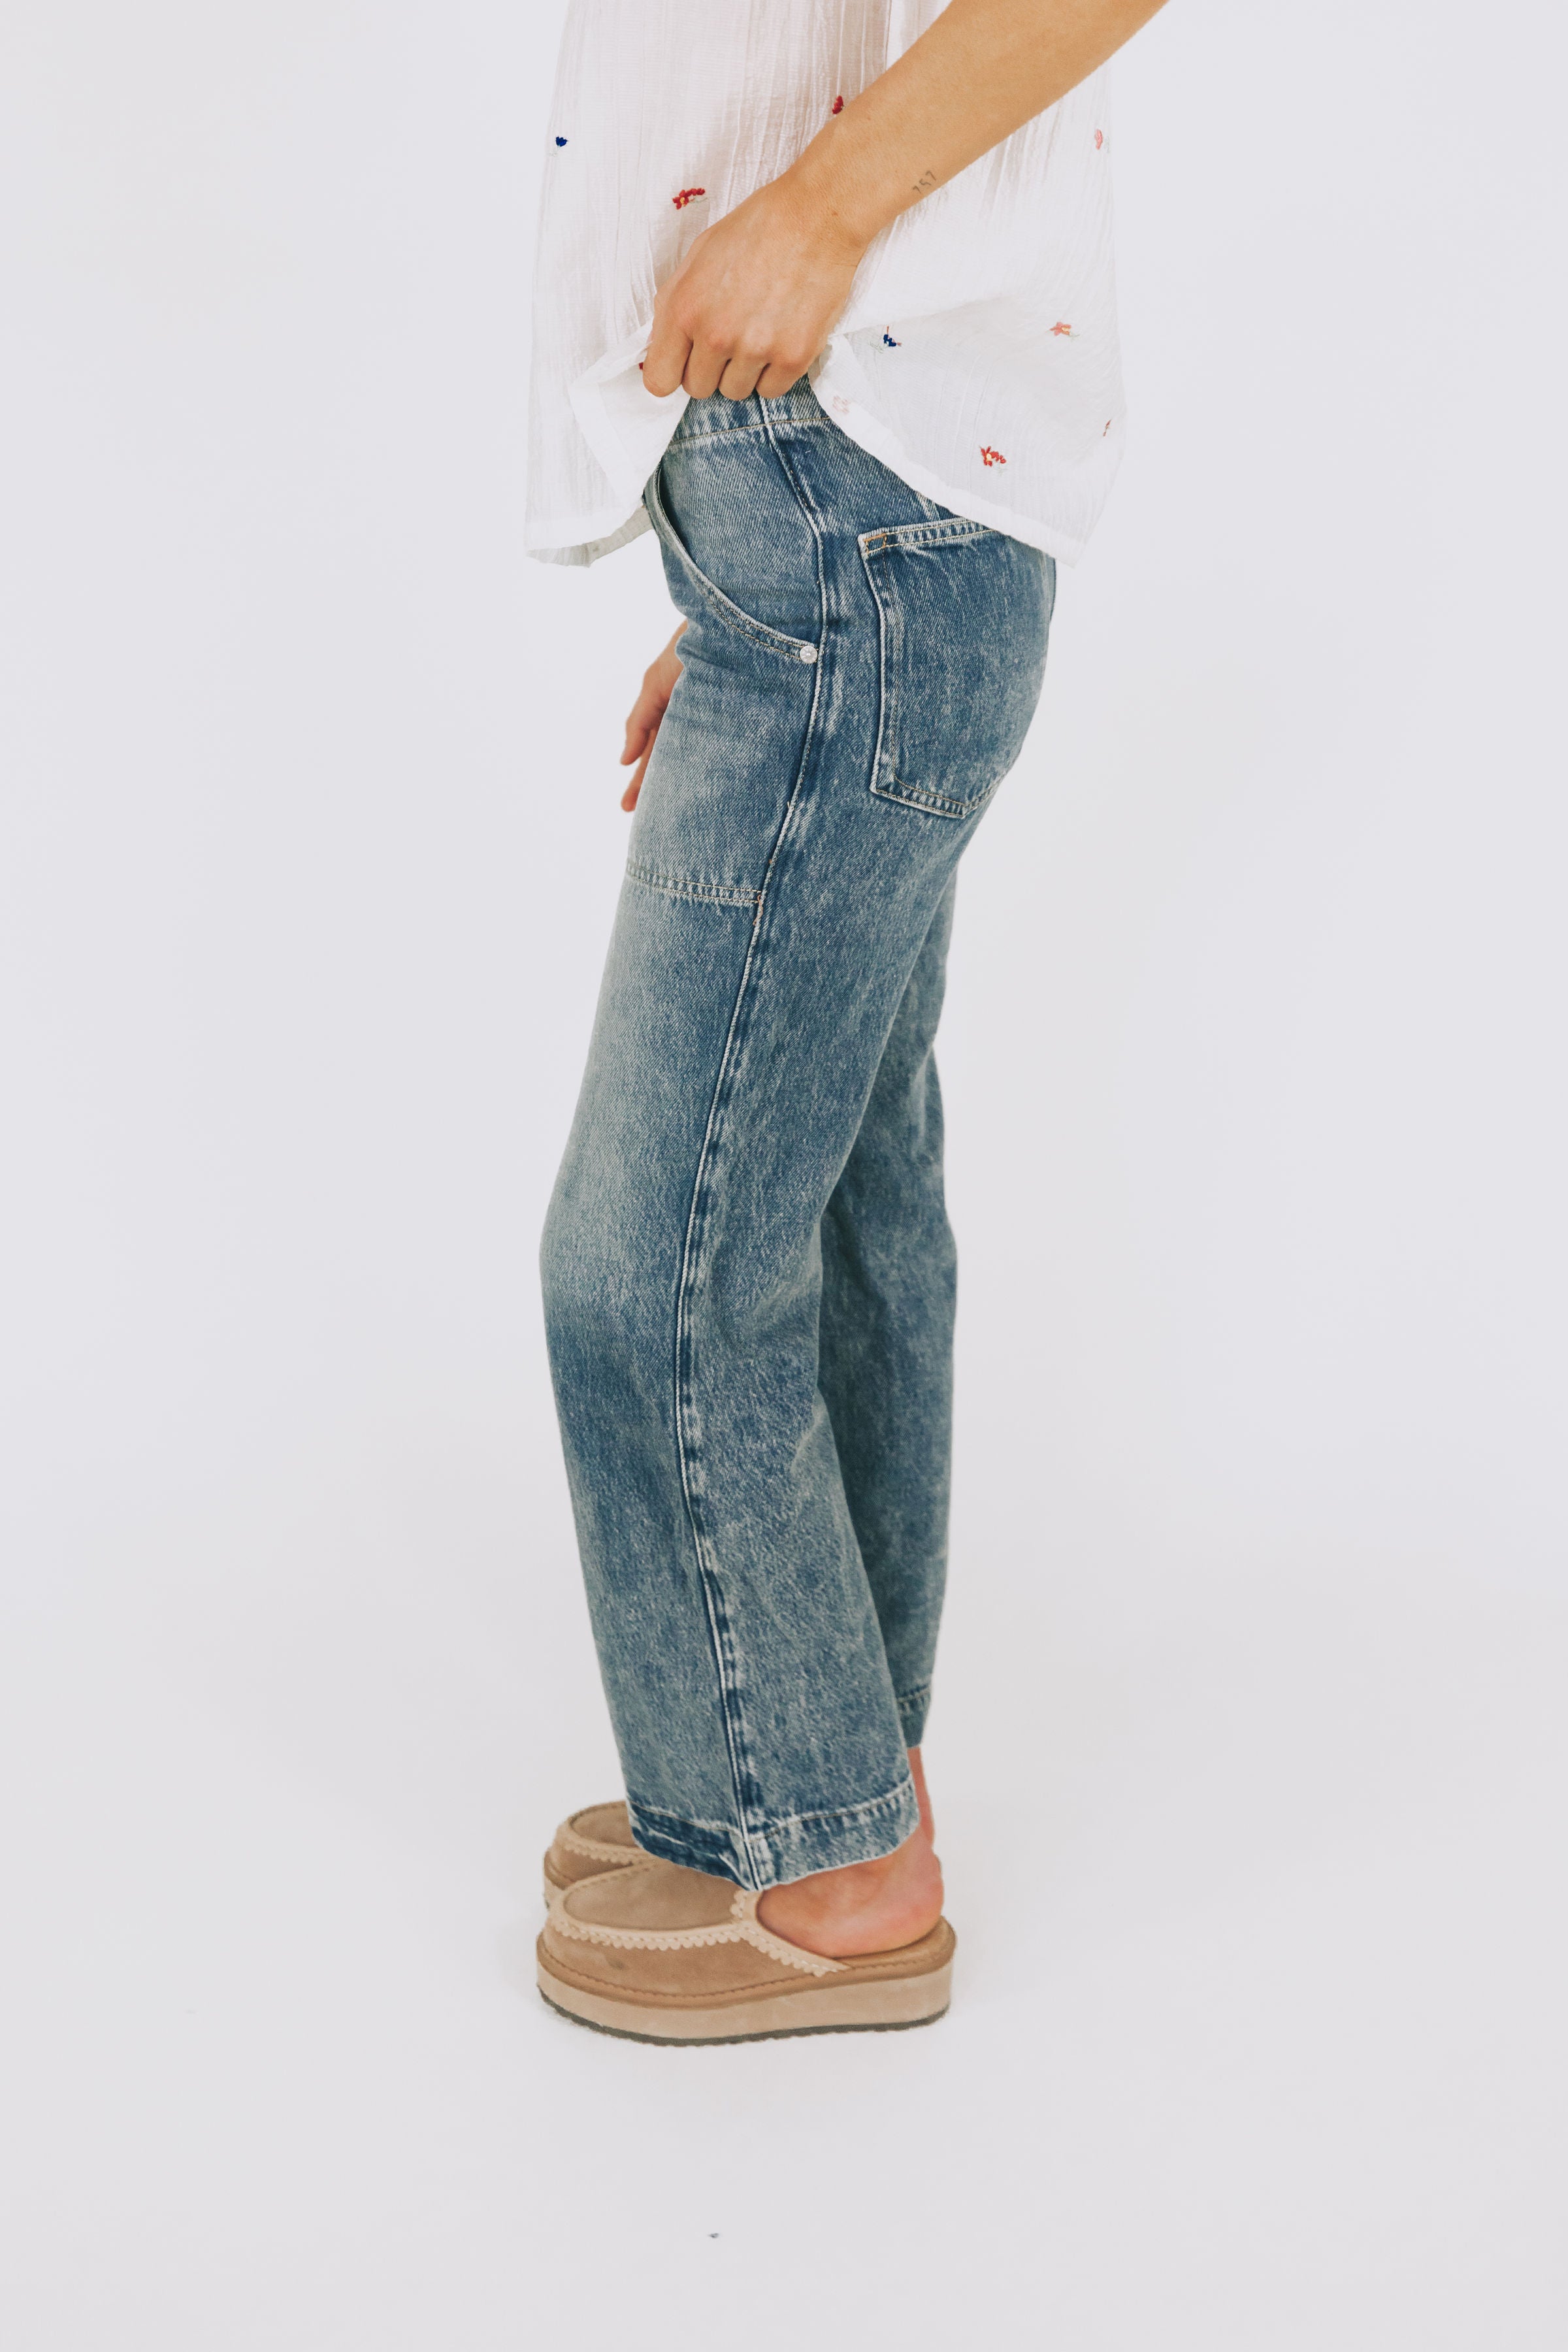 FREE PEOPLE - Golden Valley Mid-Rise Jeans